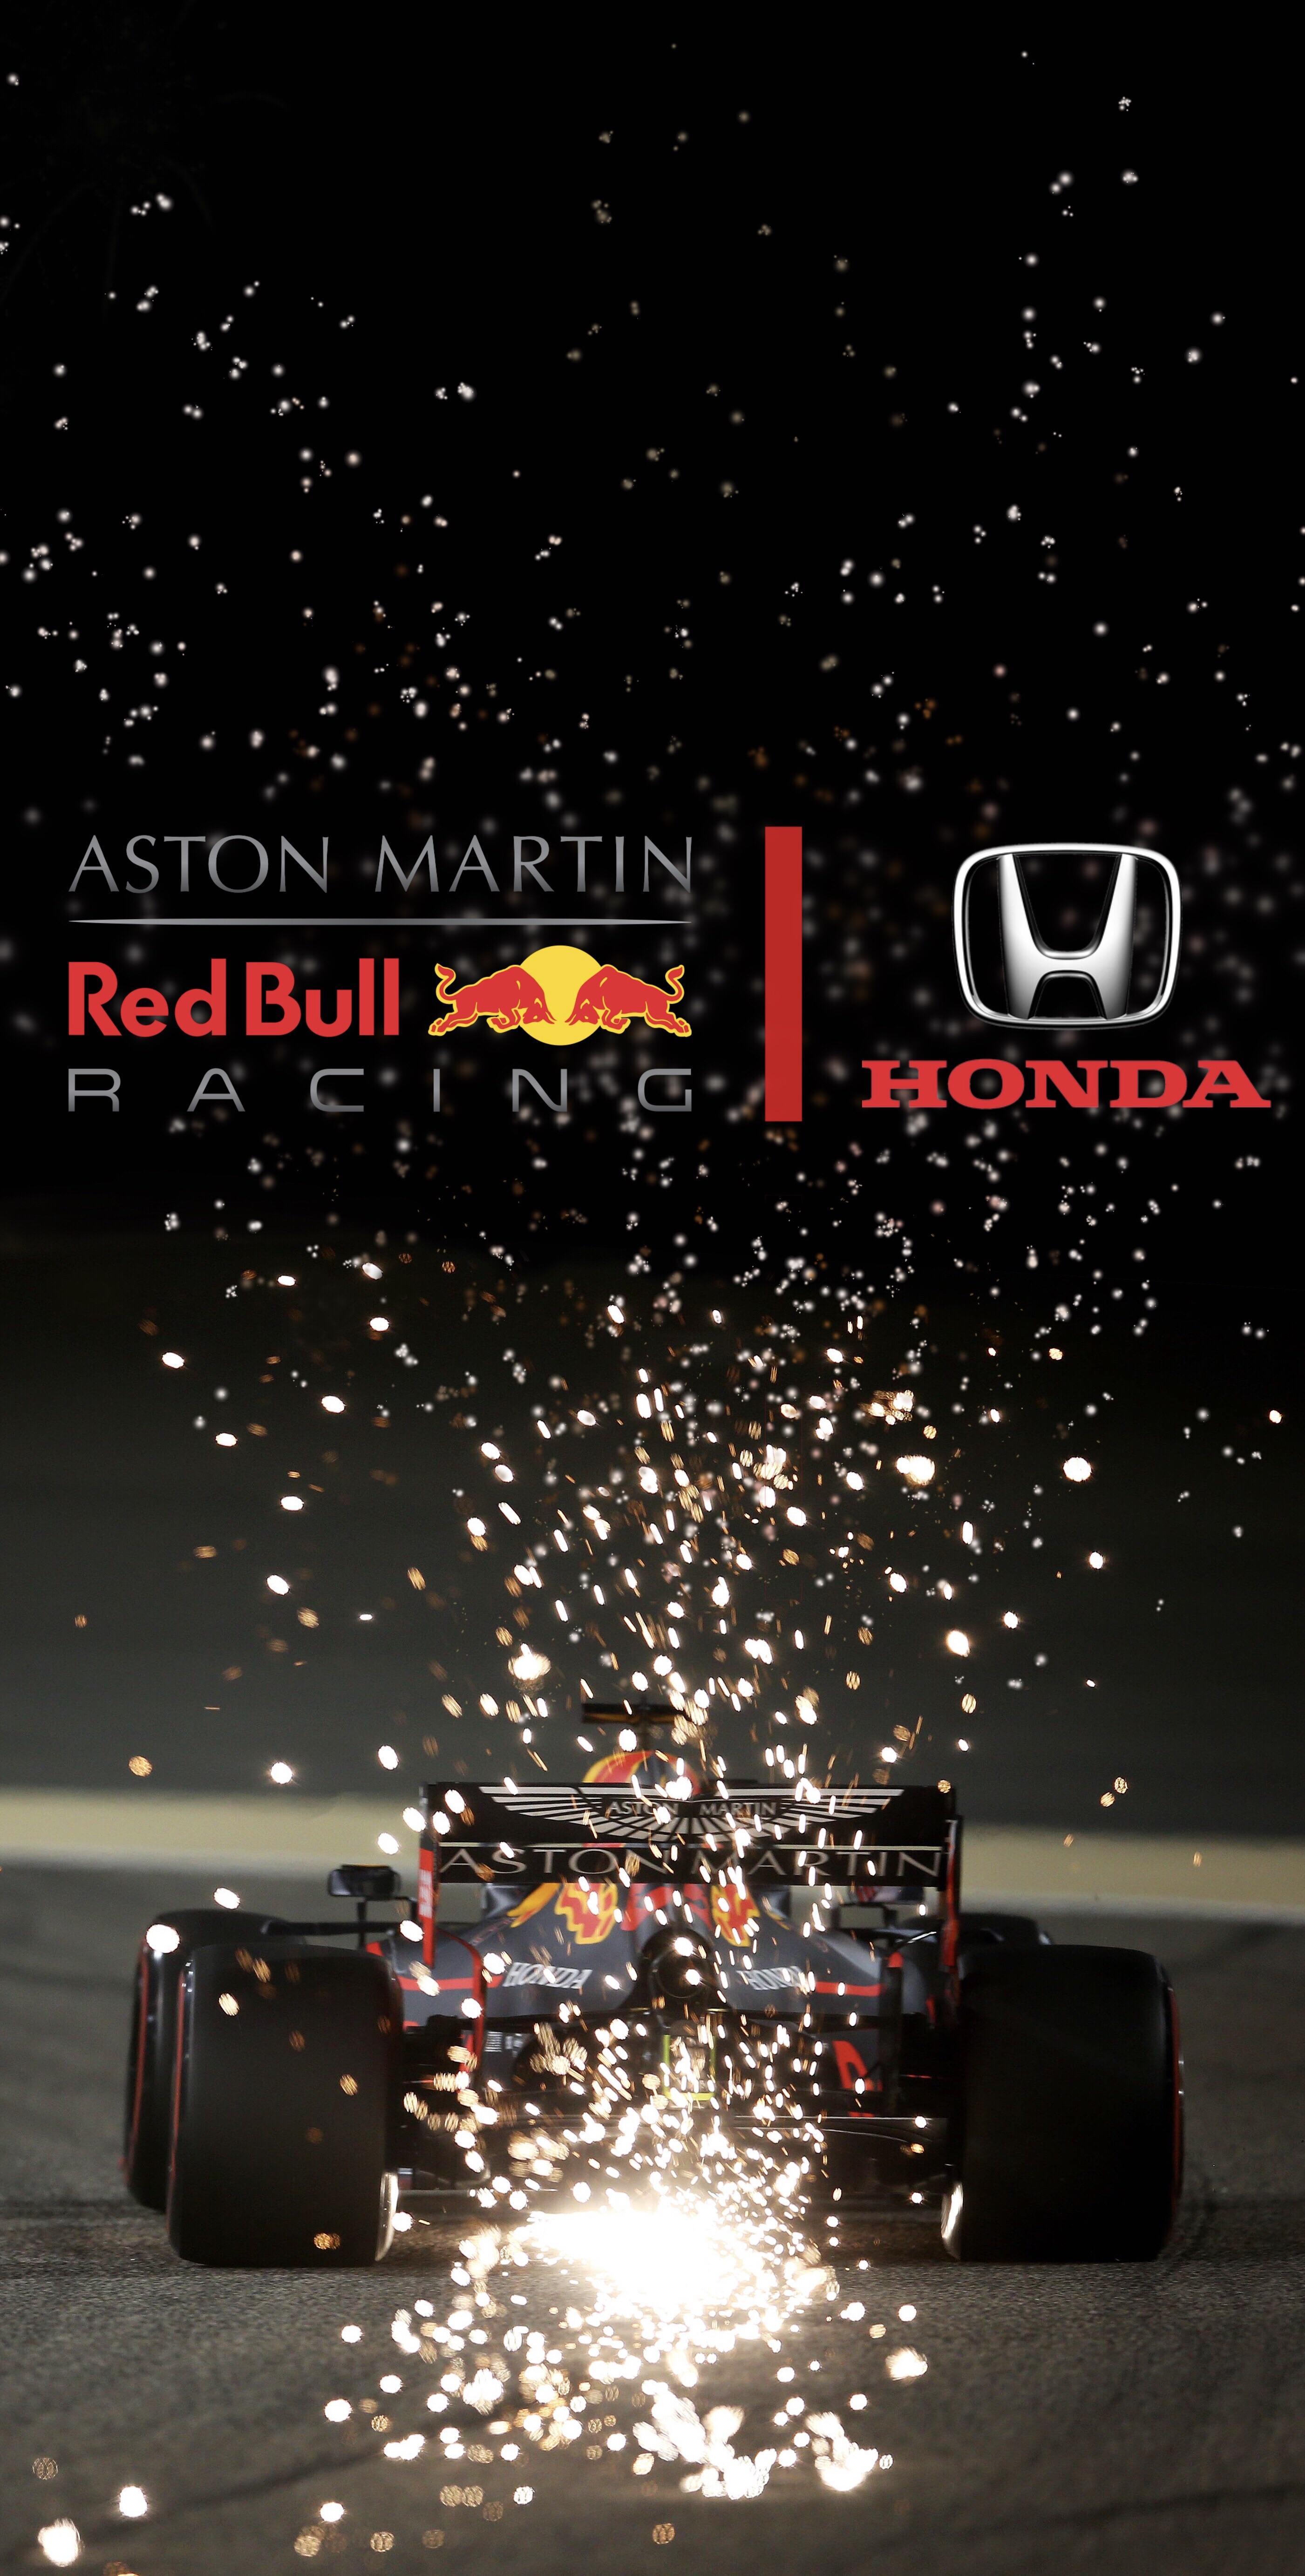 Aston Martin Red Bull IPhone X Wallpaper I Just Made. Figured Someone Else Might Want To Use It As Well!